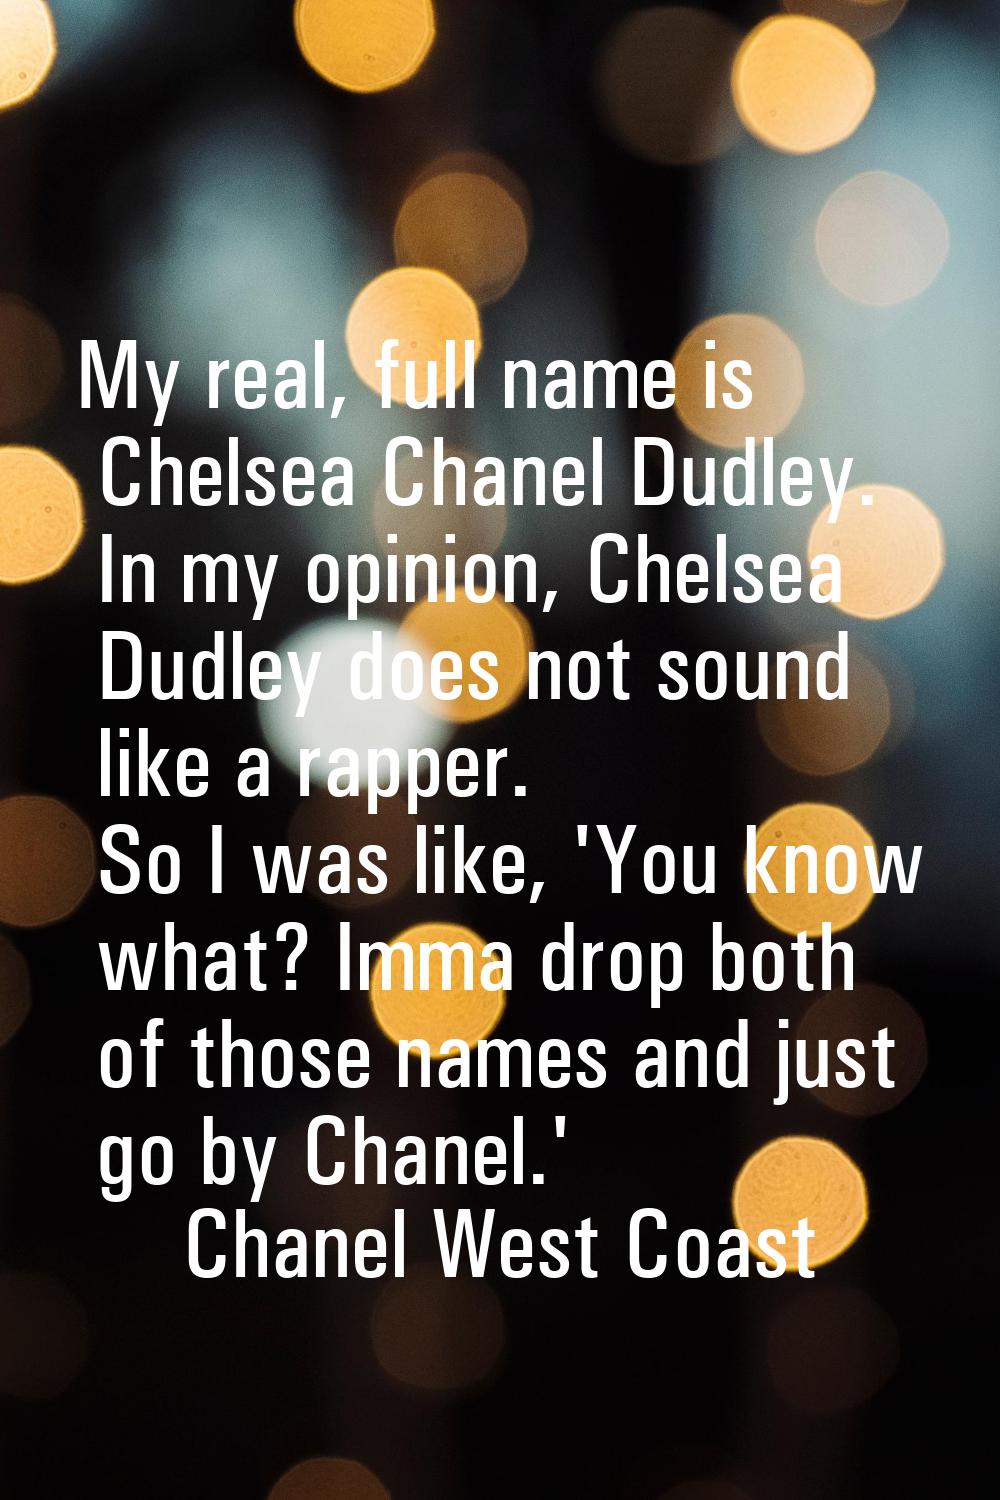 My real, full name is Chelsea Chanel Dudley. In my opinion, Chelsea Dudley does not sound like a ra